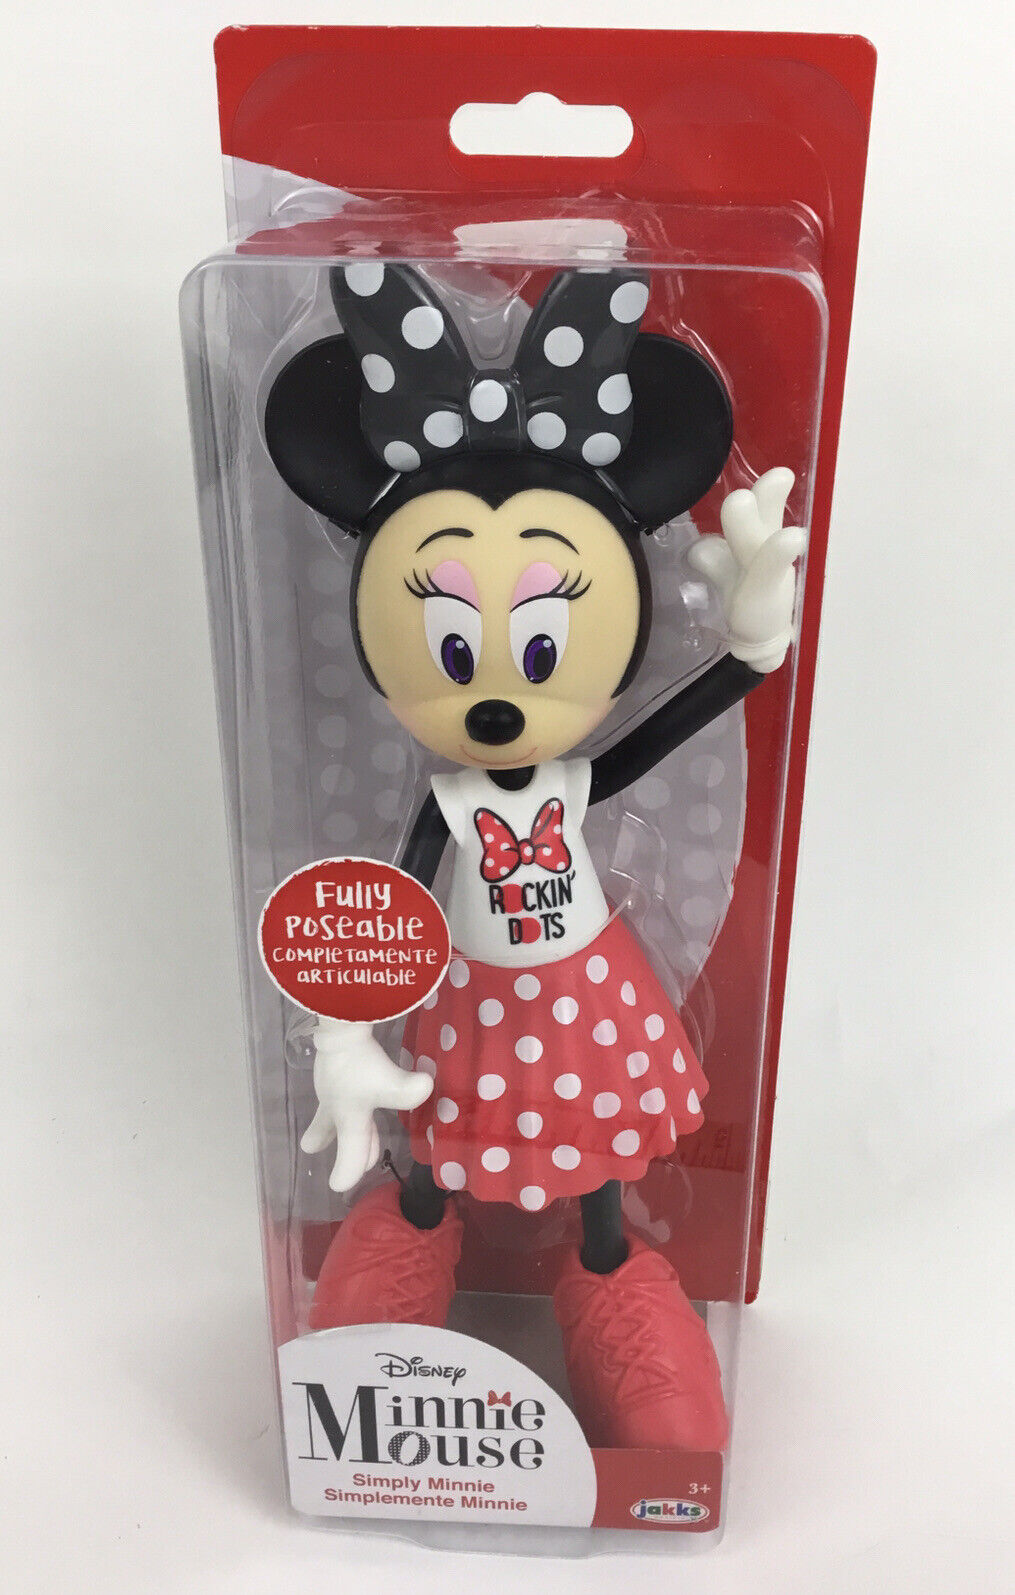 Disney Minnie Mouse Doll Simple Minnie Posable Minnie Mouse Rockin’ Dots New!